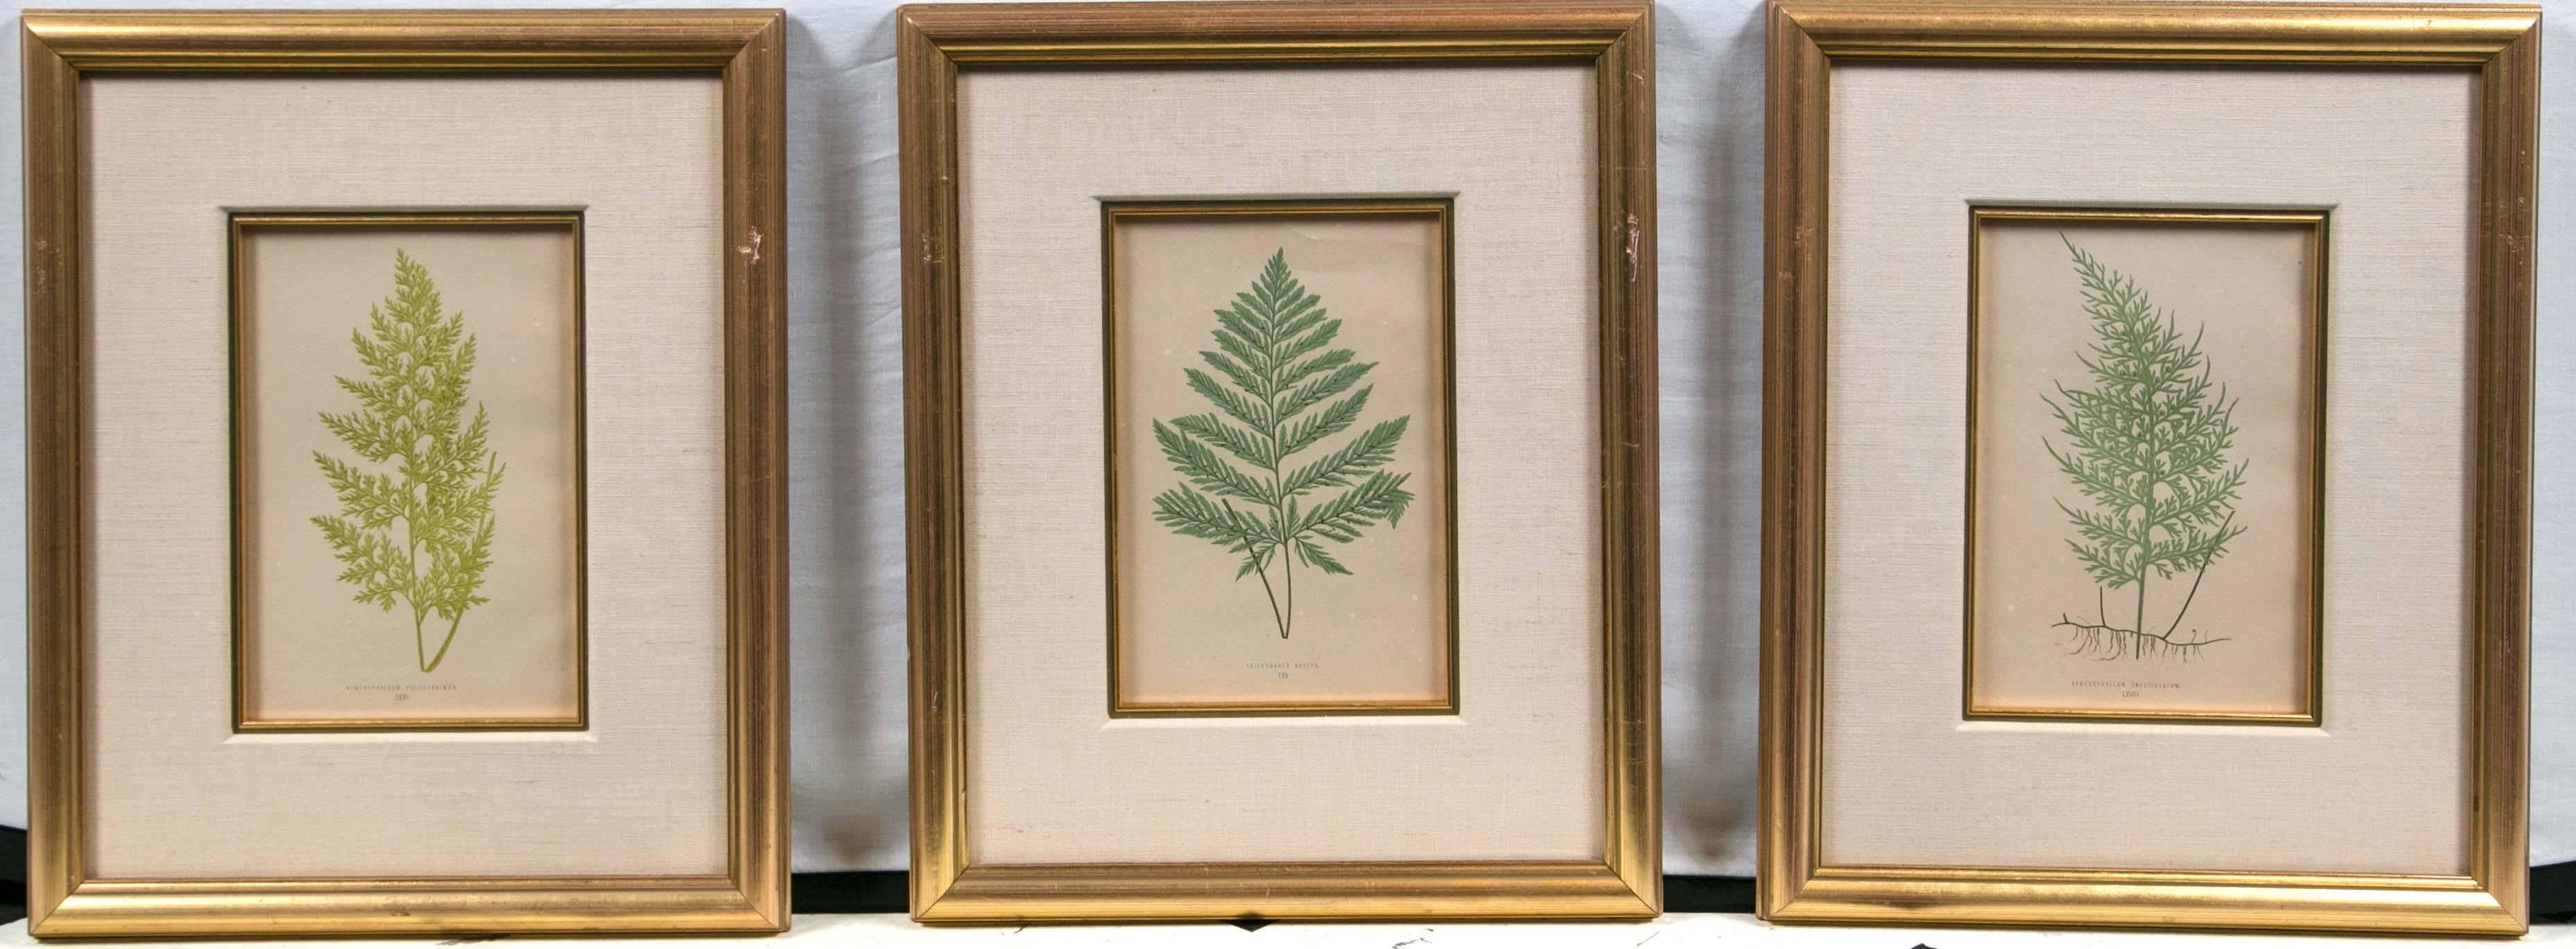 Set of six Fern prints from 'Ferns: British and Exotic' by E.J. Lowe published in England, mid-19th century. Retaining vibrant shades of original green colors. Custom gilt frames and fillets, with linen mats. Image size: 9-1/2 inches high by 6